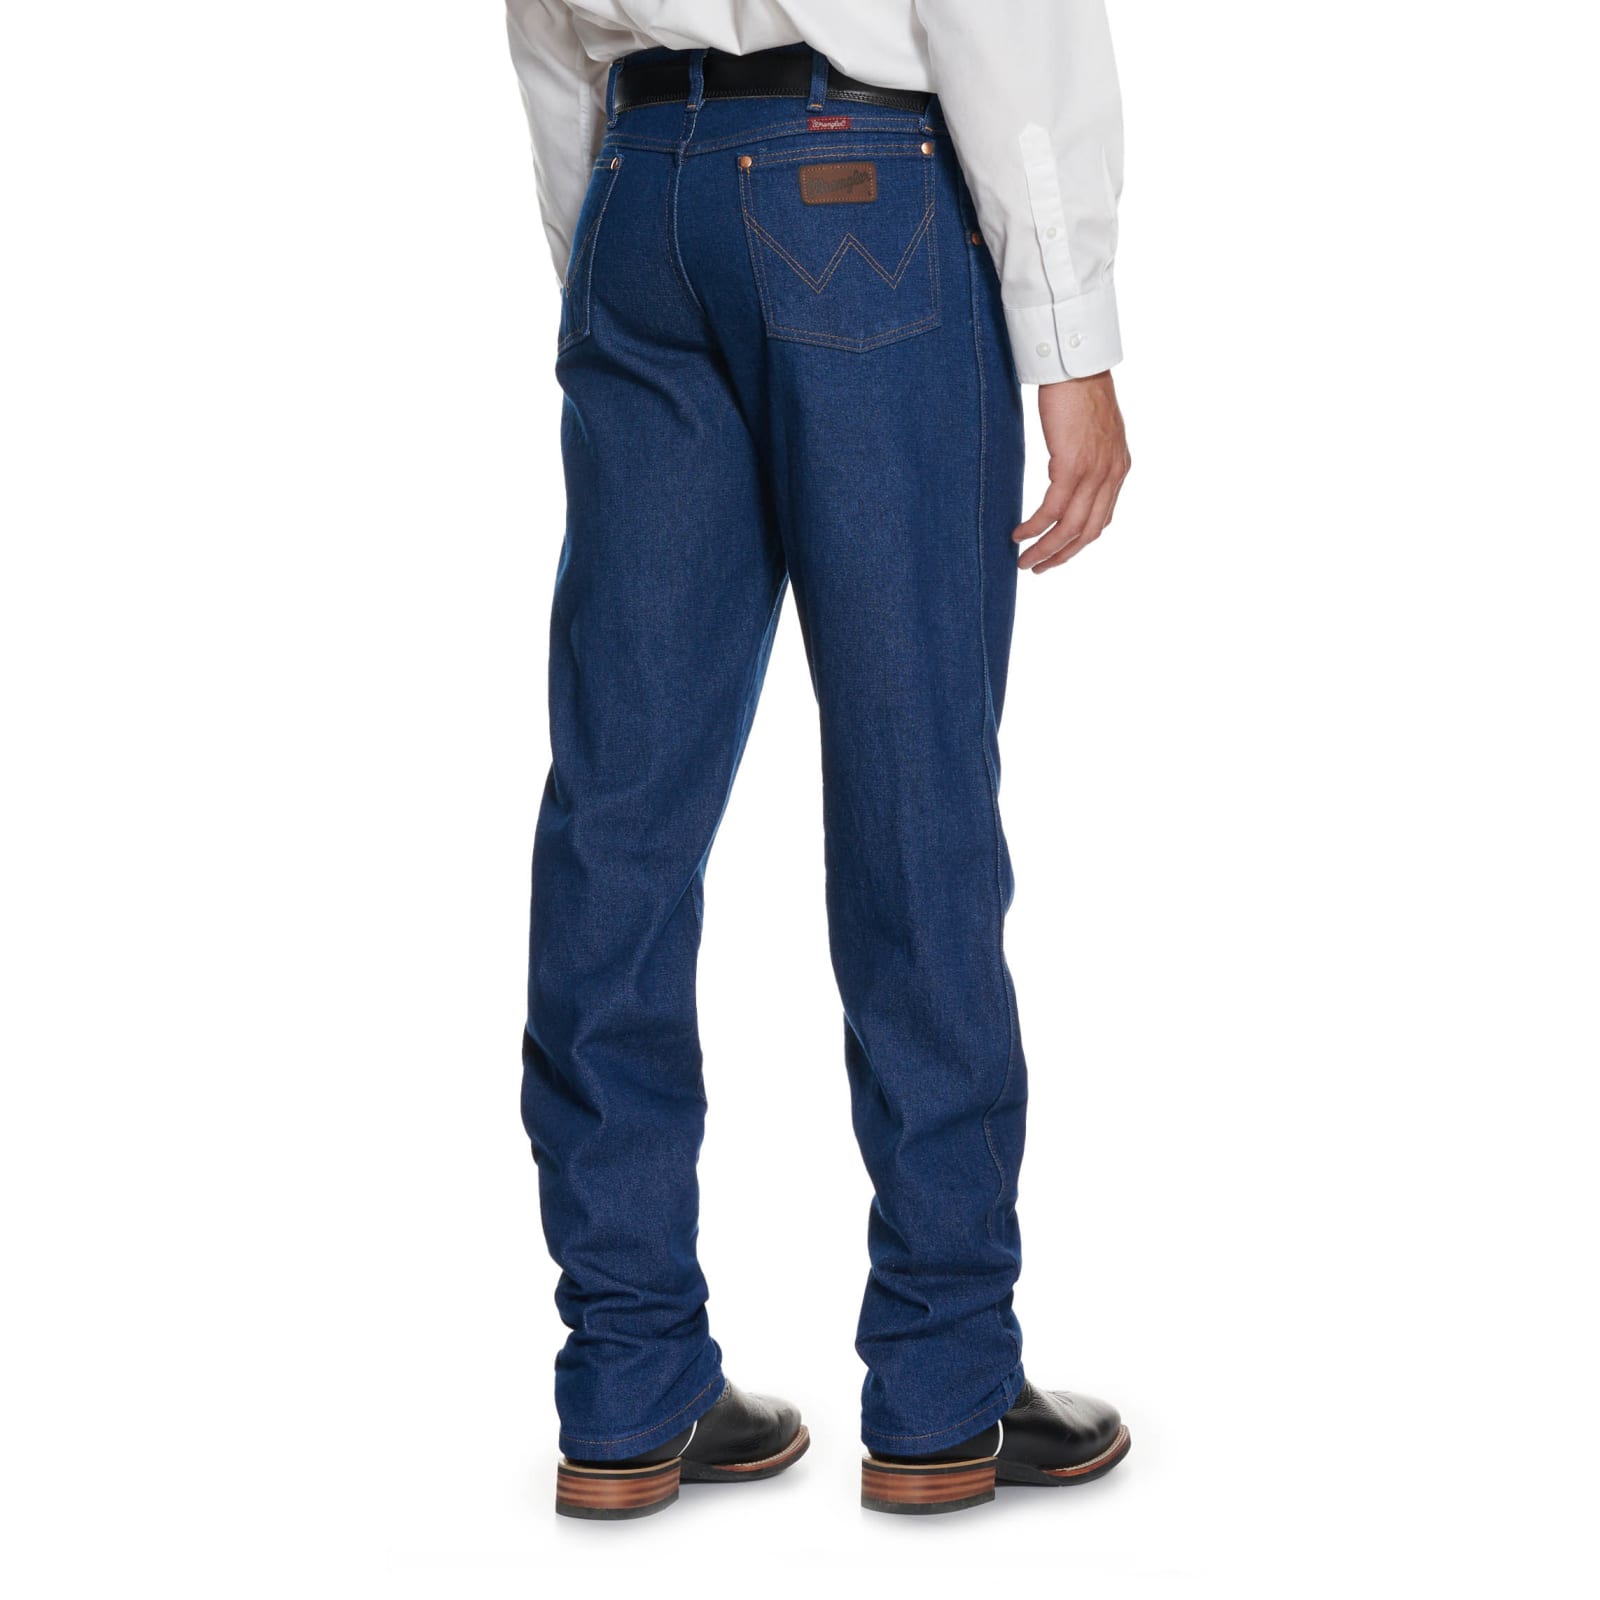 Wrangler Cowboy Cut Prewash Relaxed Fit Jeans available at Cavenders